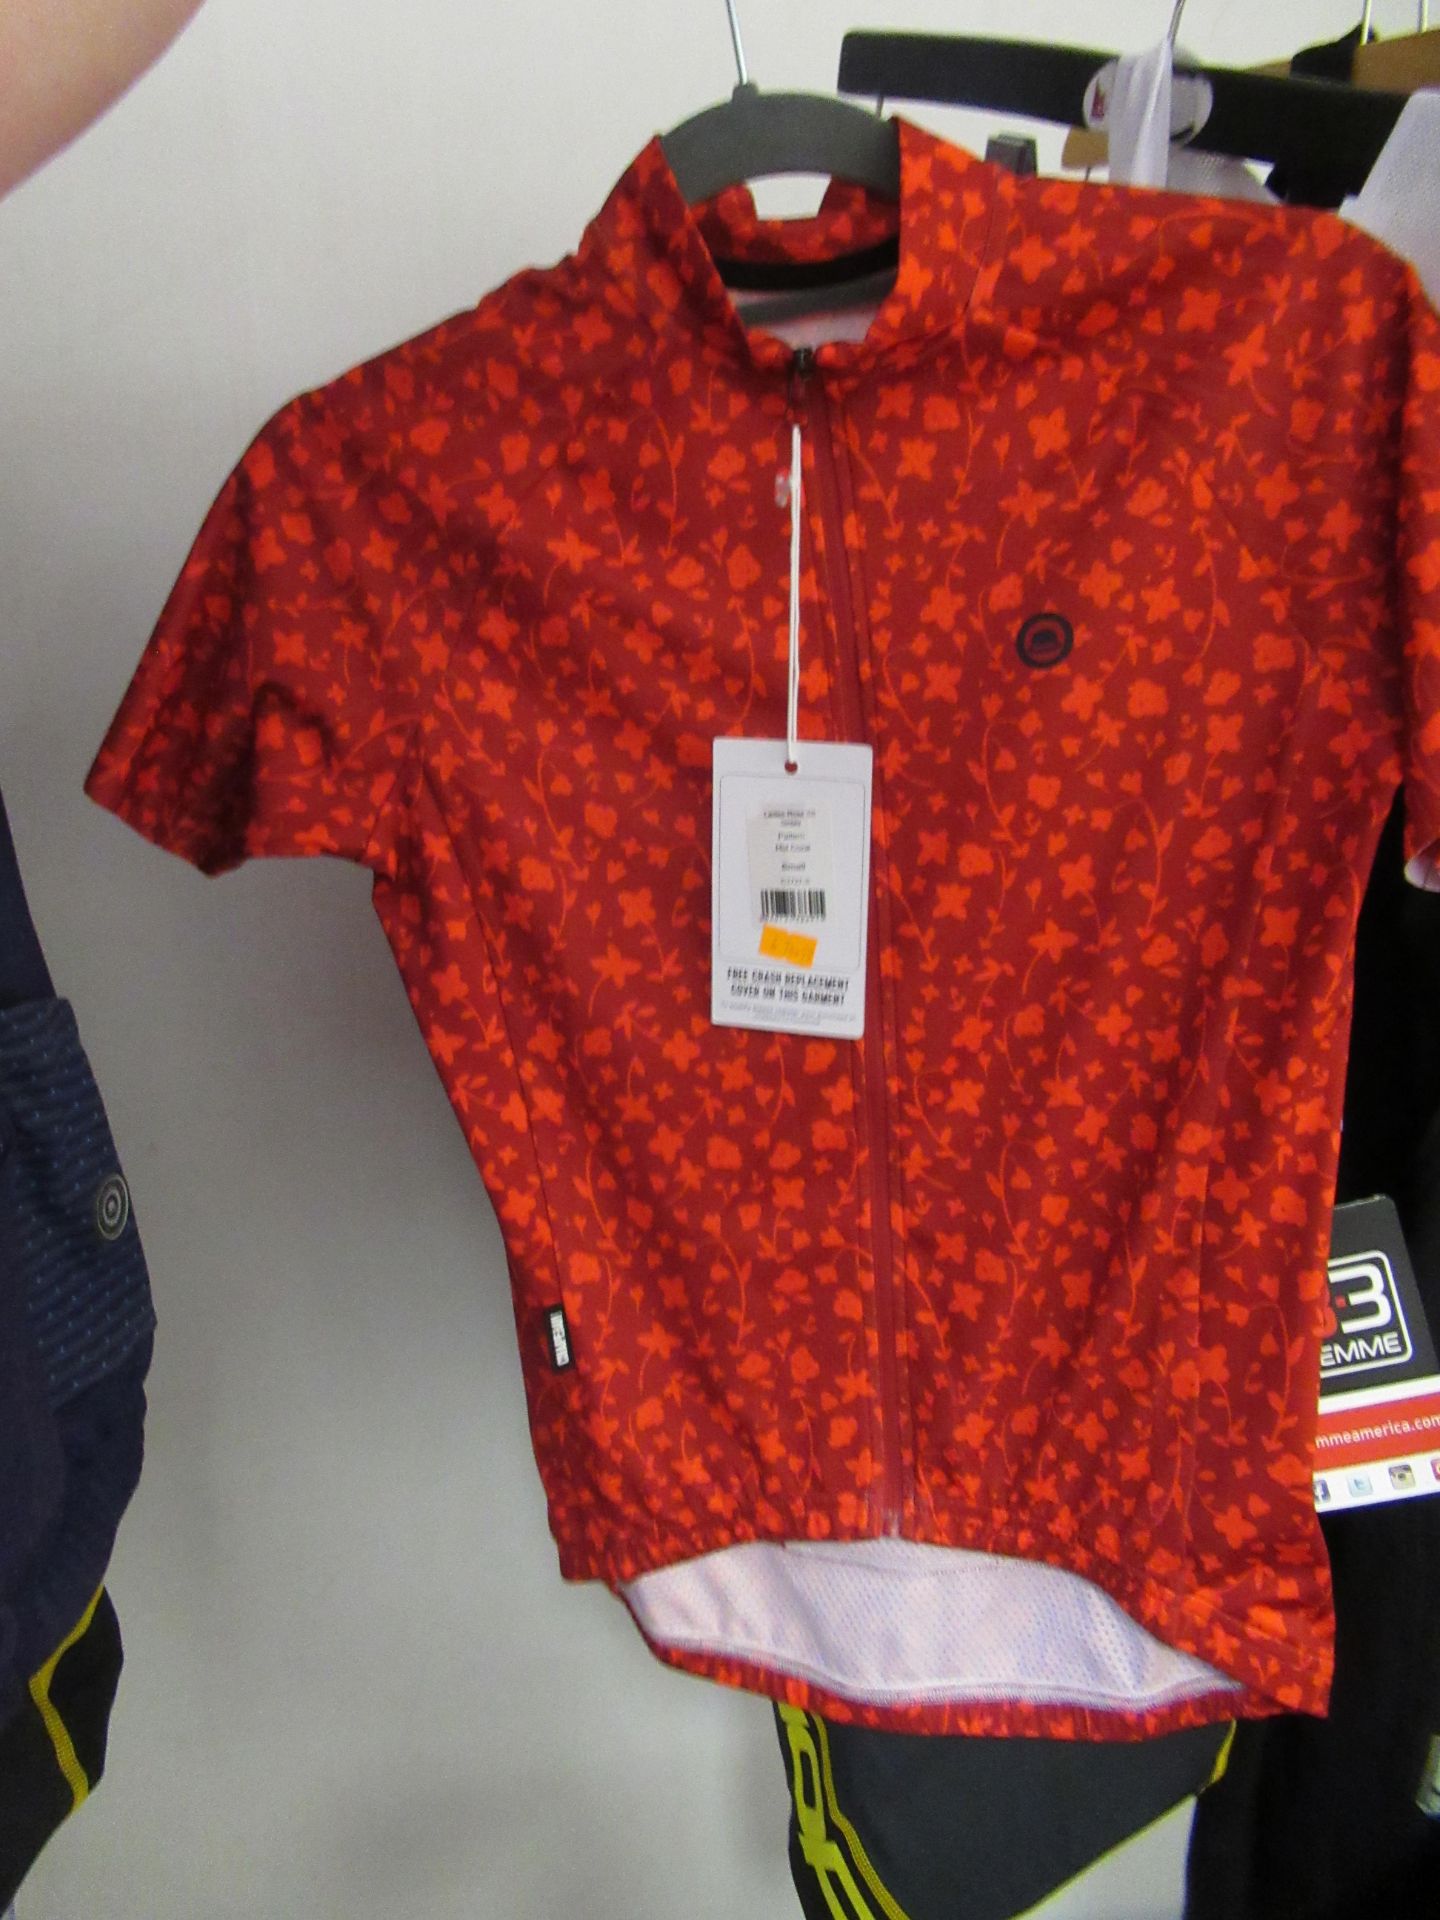 XS/S Womens Cycling Clothes - Image 5 of 10